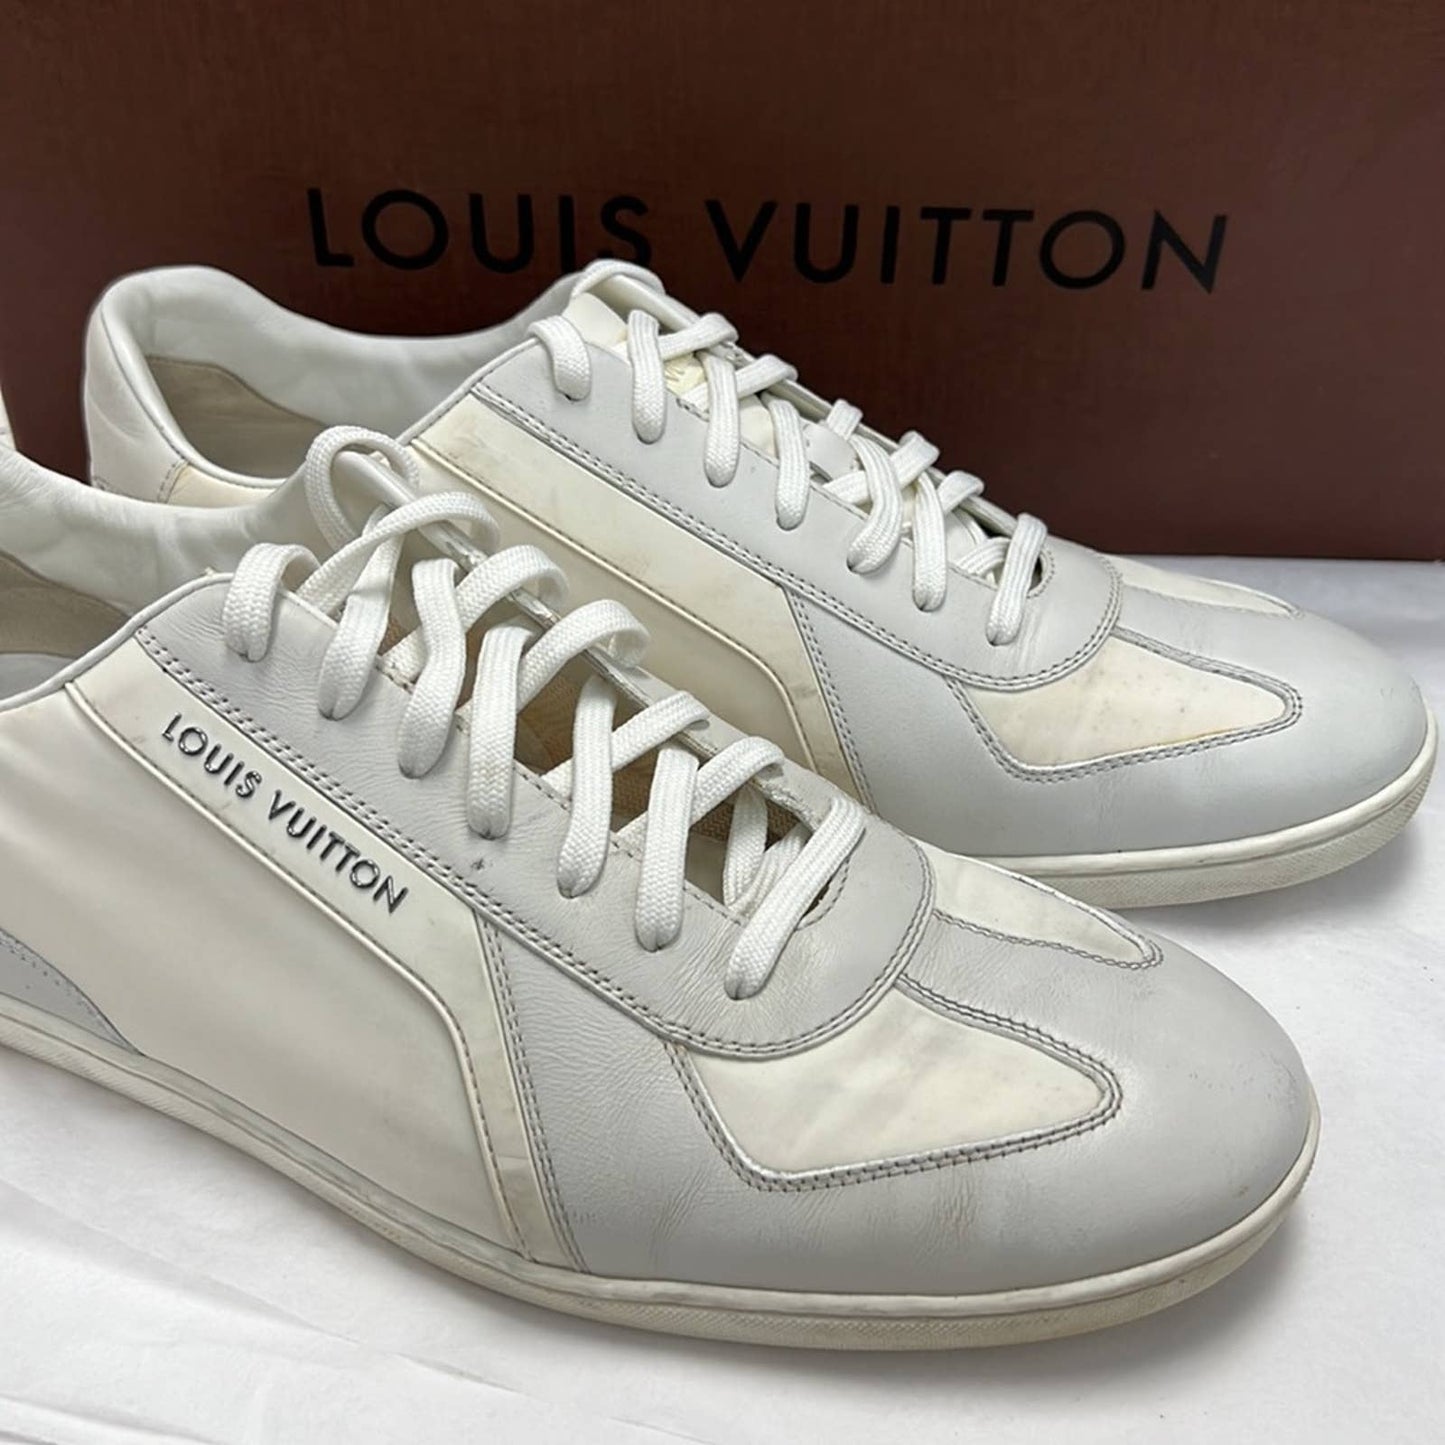 LOUIS VUITTON Men's White Leather Trim Lace up Low Top Sneakers 8